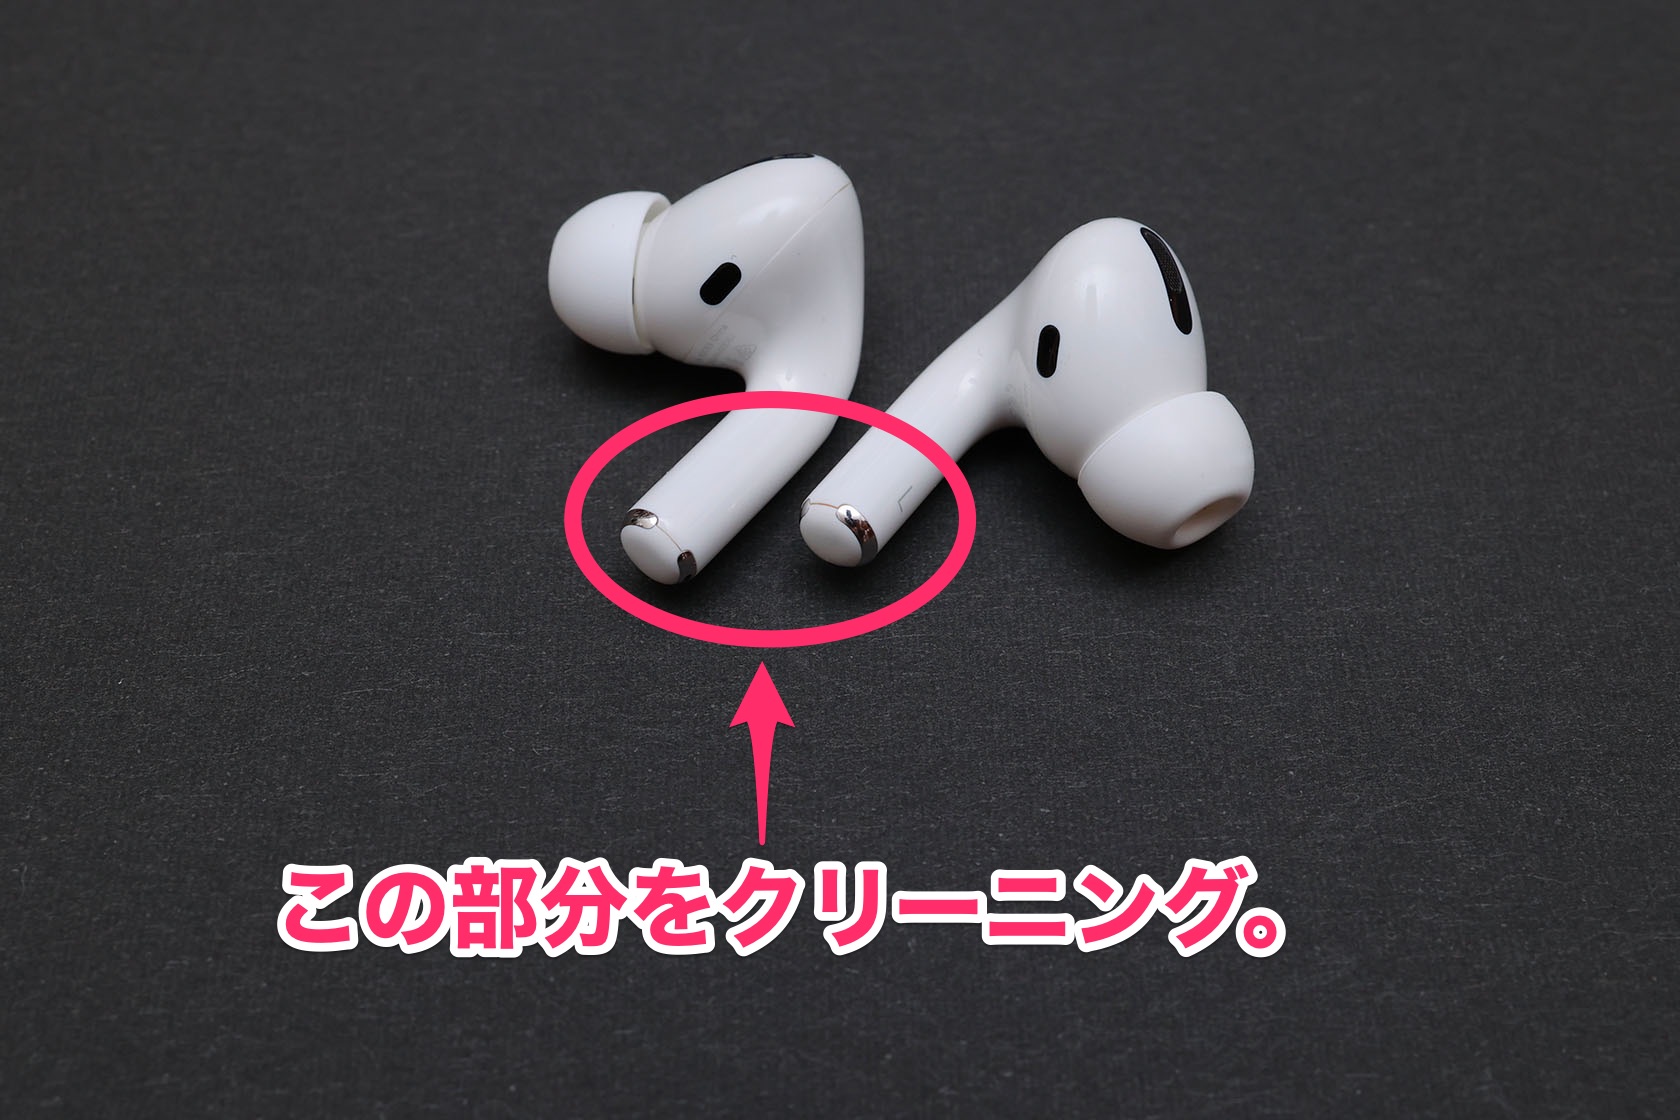 AirPods / AirPods Pro 本体をクリーニング